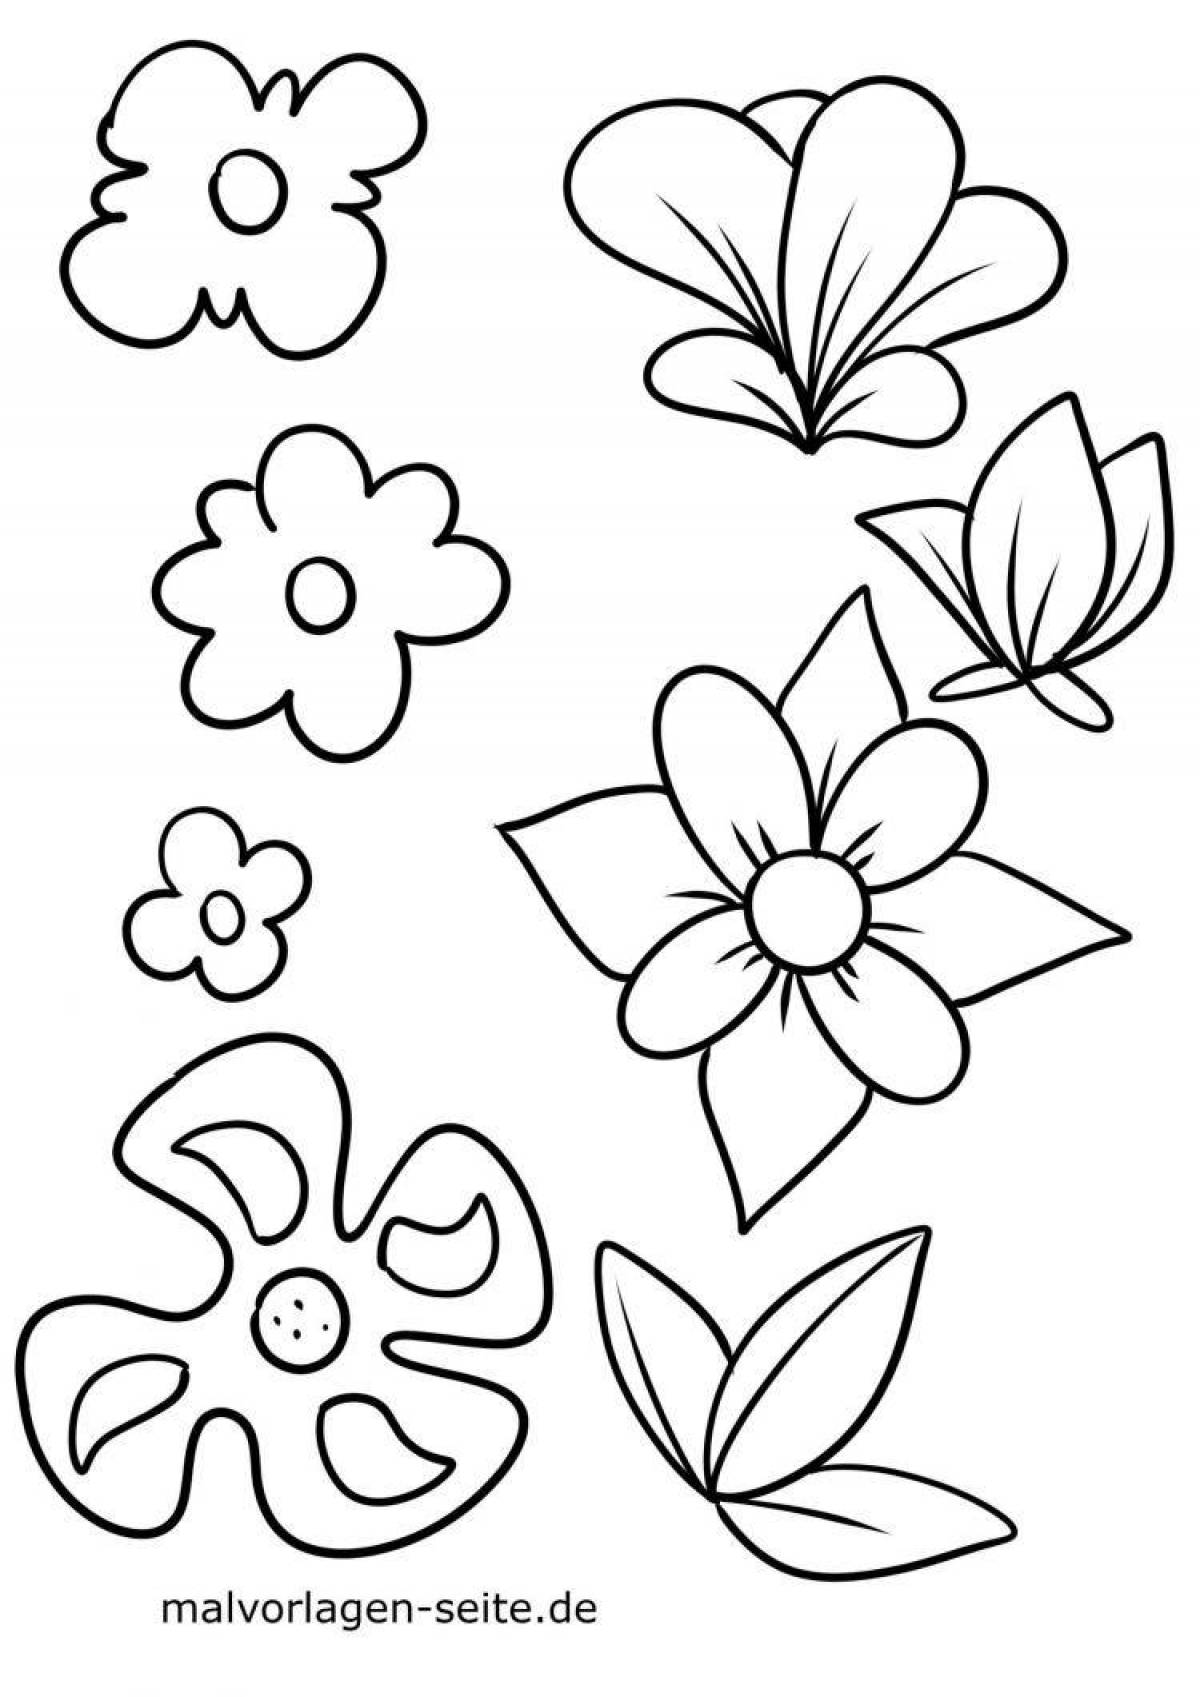 Playful coloring of flowers